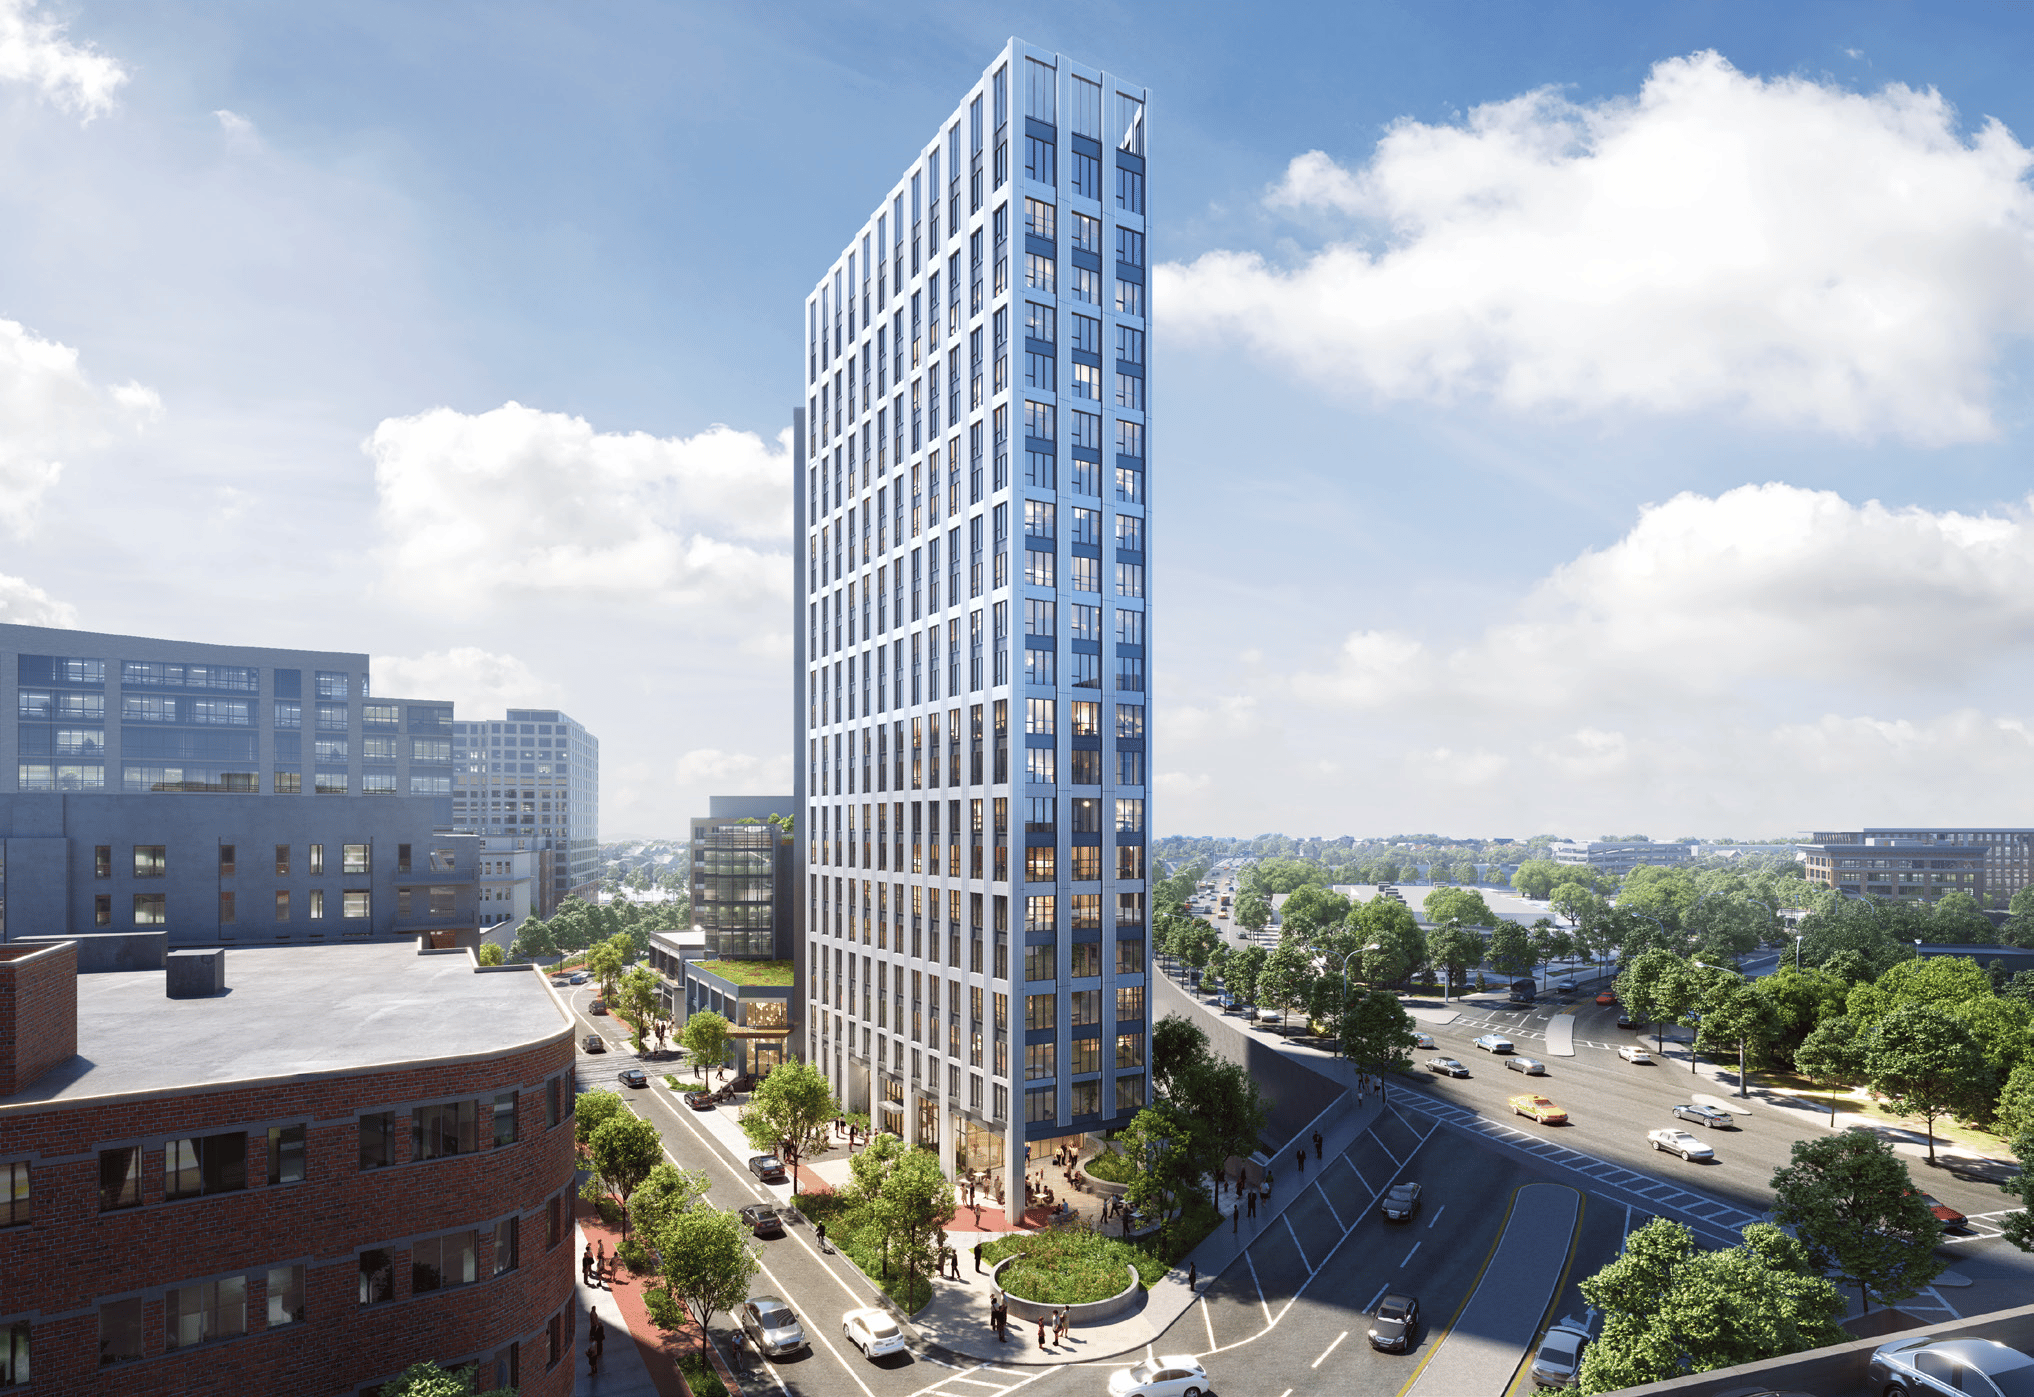 20-Story Tower, Offices Proposed in Downtown Quincy - Banker & Tradesman